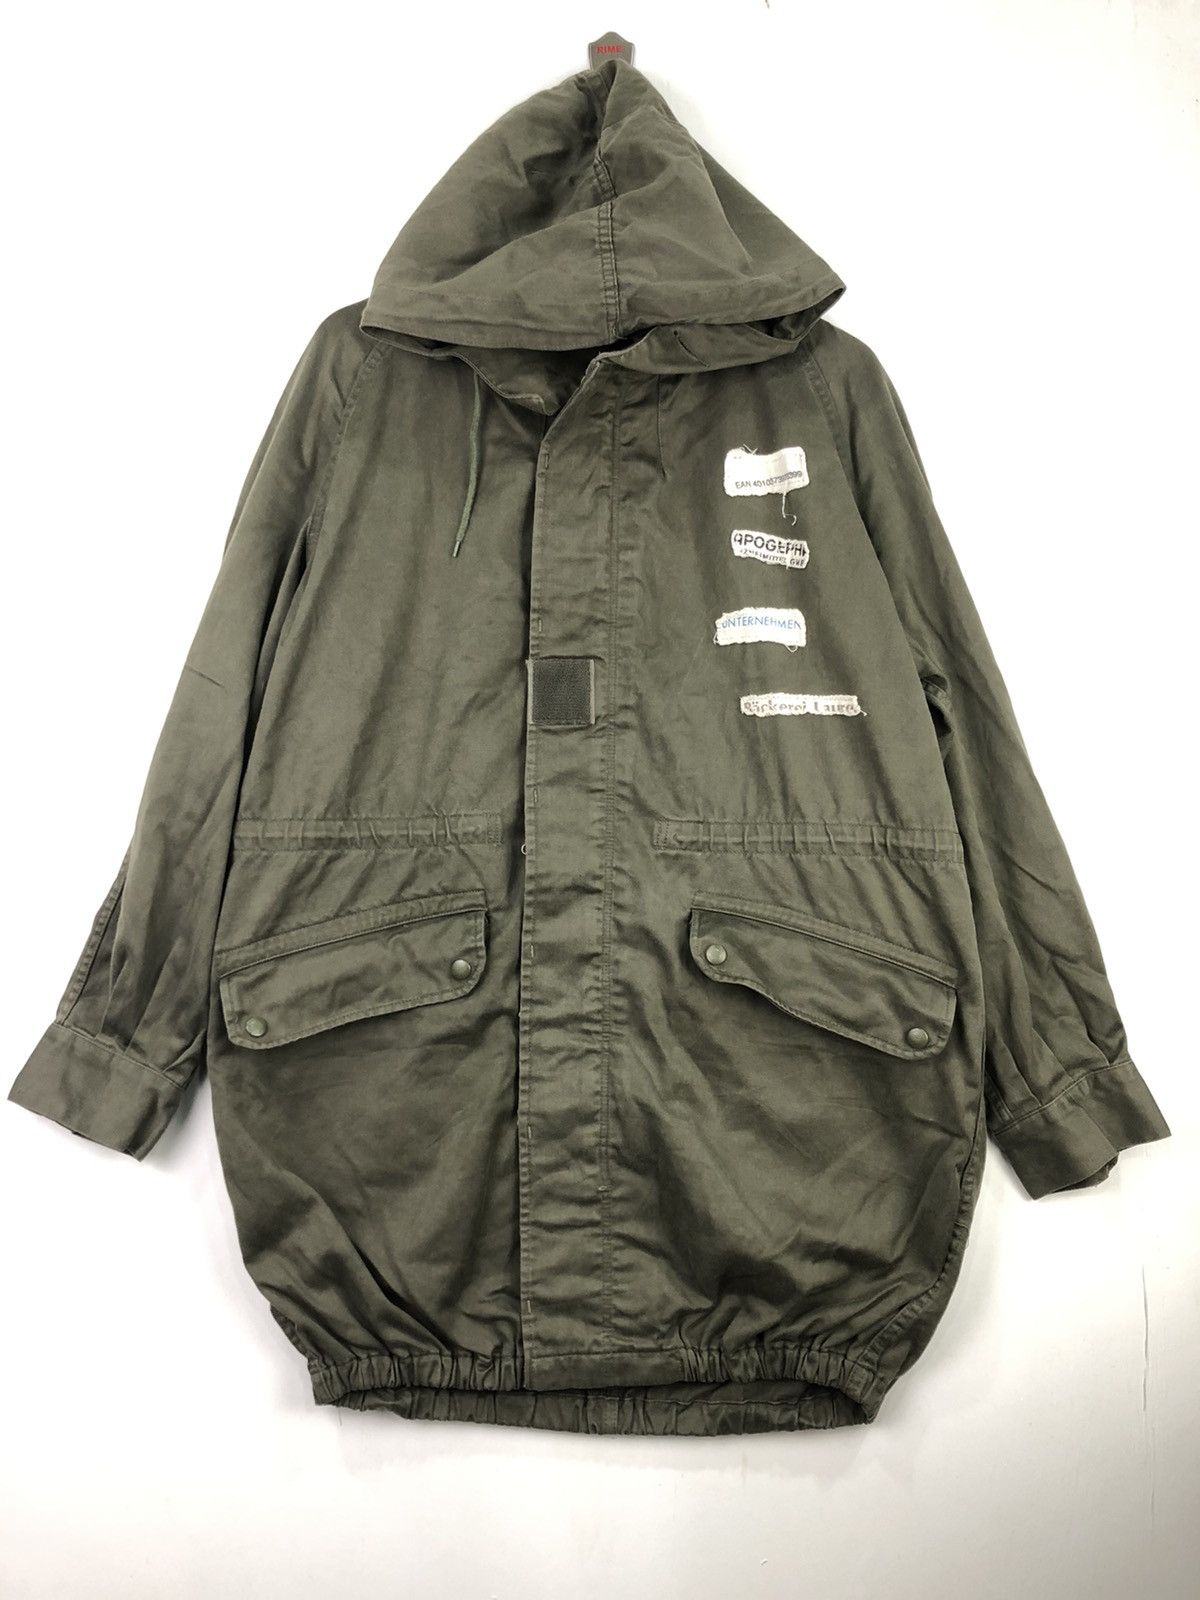 Sample Industries SAMPLE PARKA PATCHWORK STYLE | Grailed